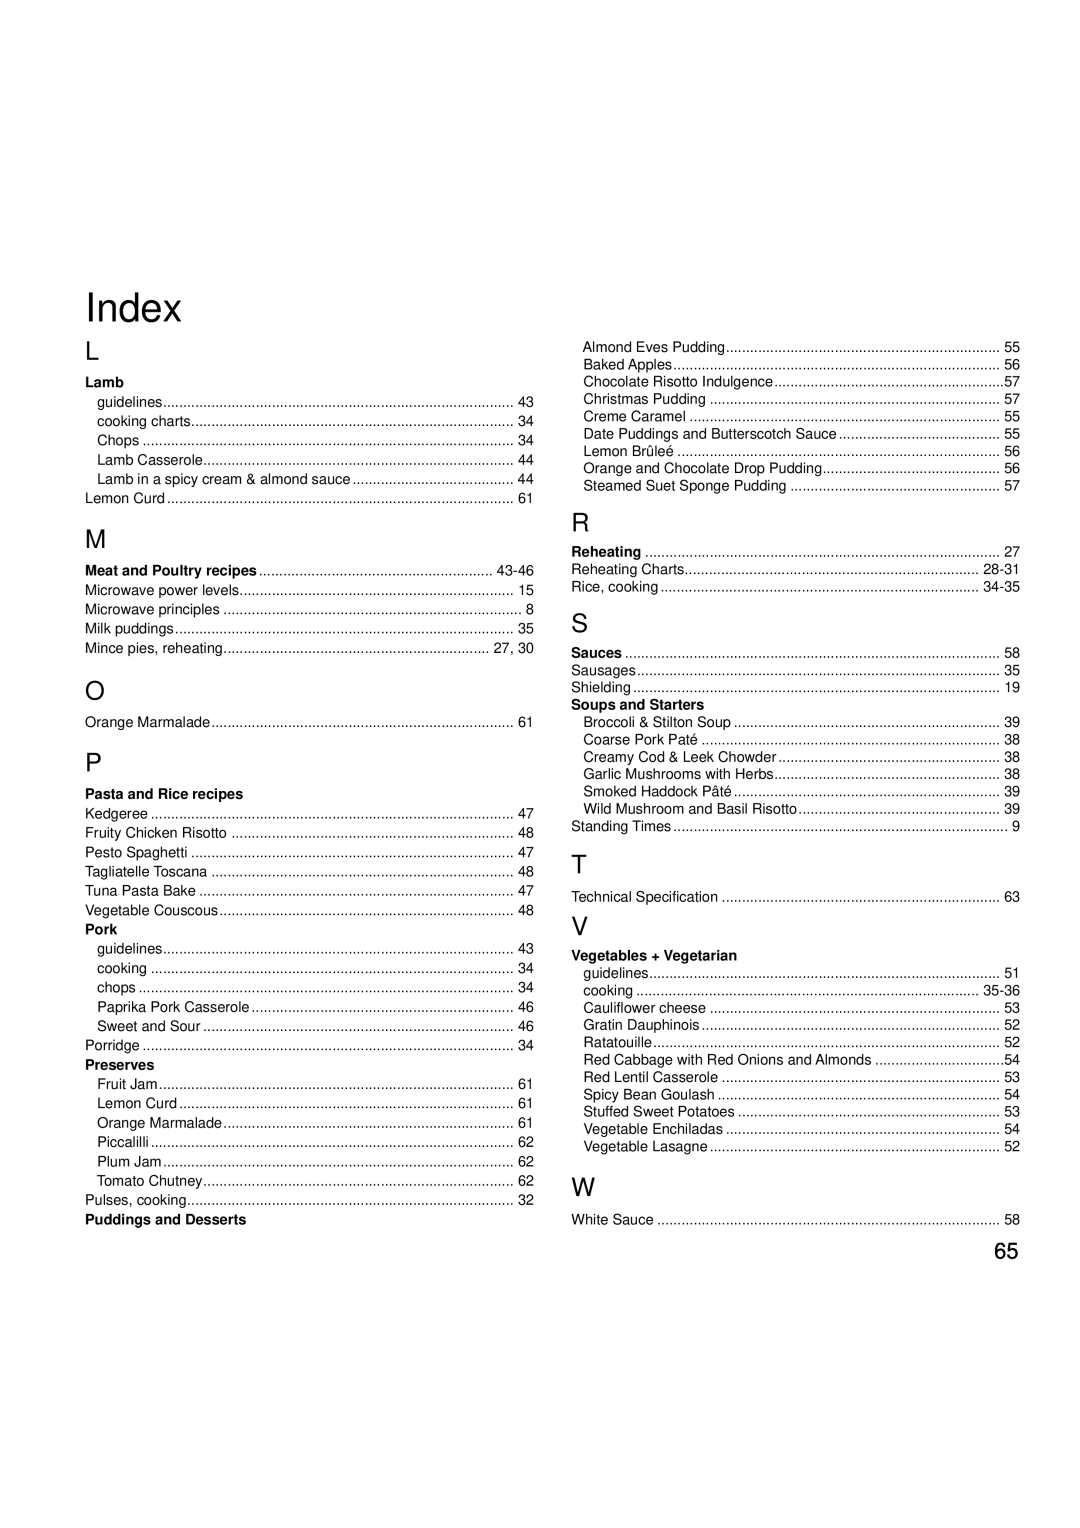 Creda MBO55 Index, Lamb, Pasta and Rice recipes, Pork, Preserves, Puddings and Desserts, Soups and Starters, 28-31, 34-35 